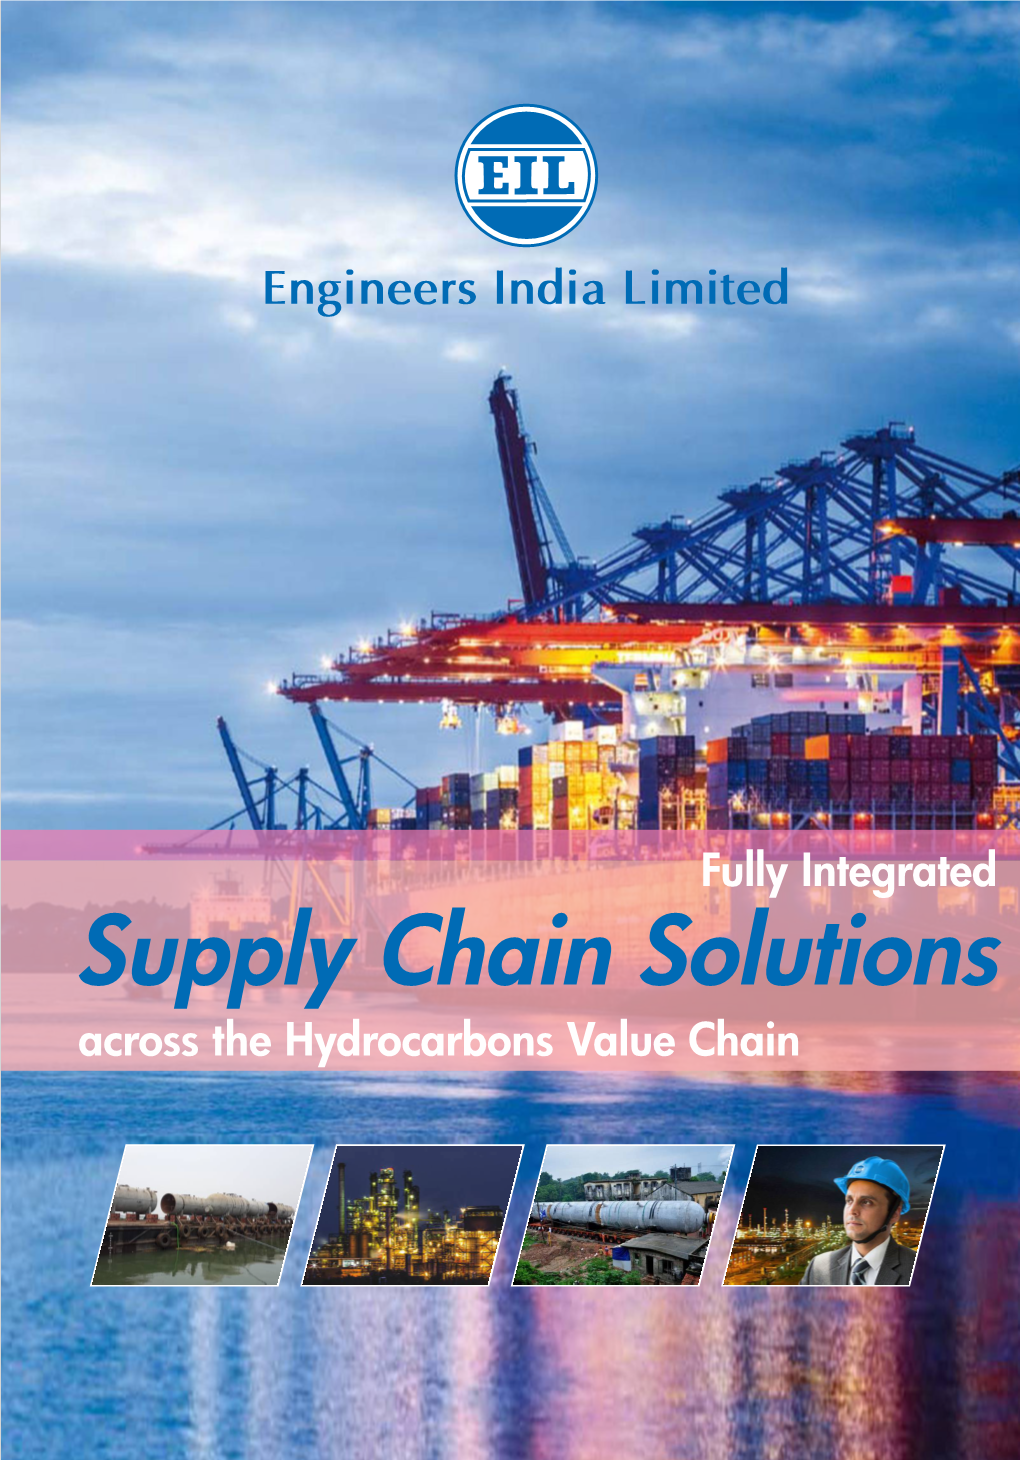 Supply Chain Solutions Across the Hydrocarbons Value Chain Engengineersineers India India Limited Limited